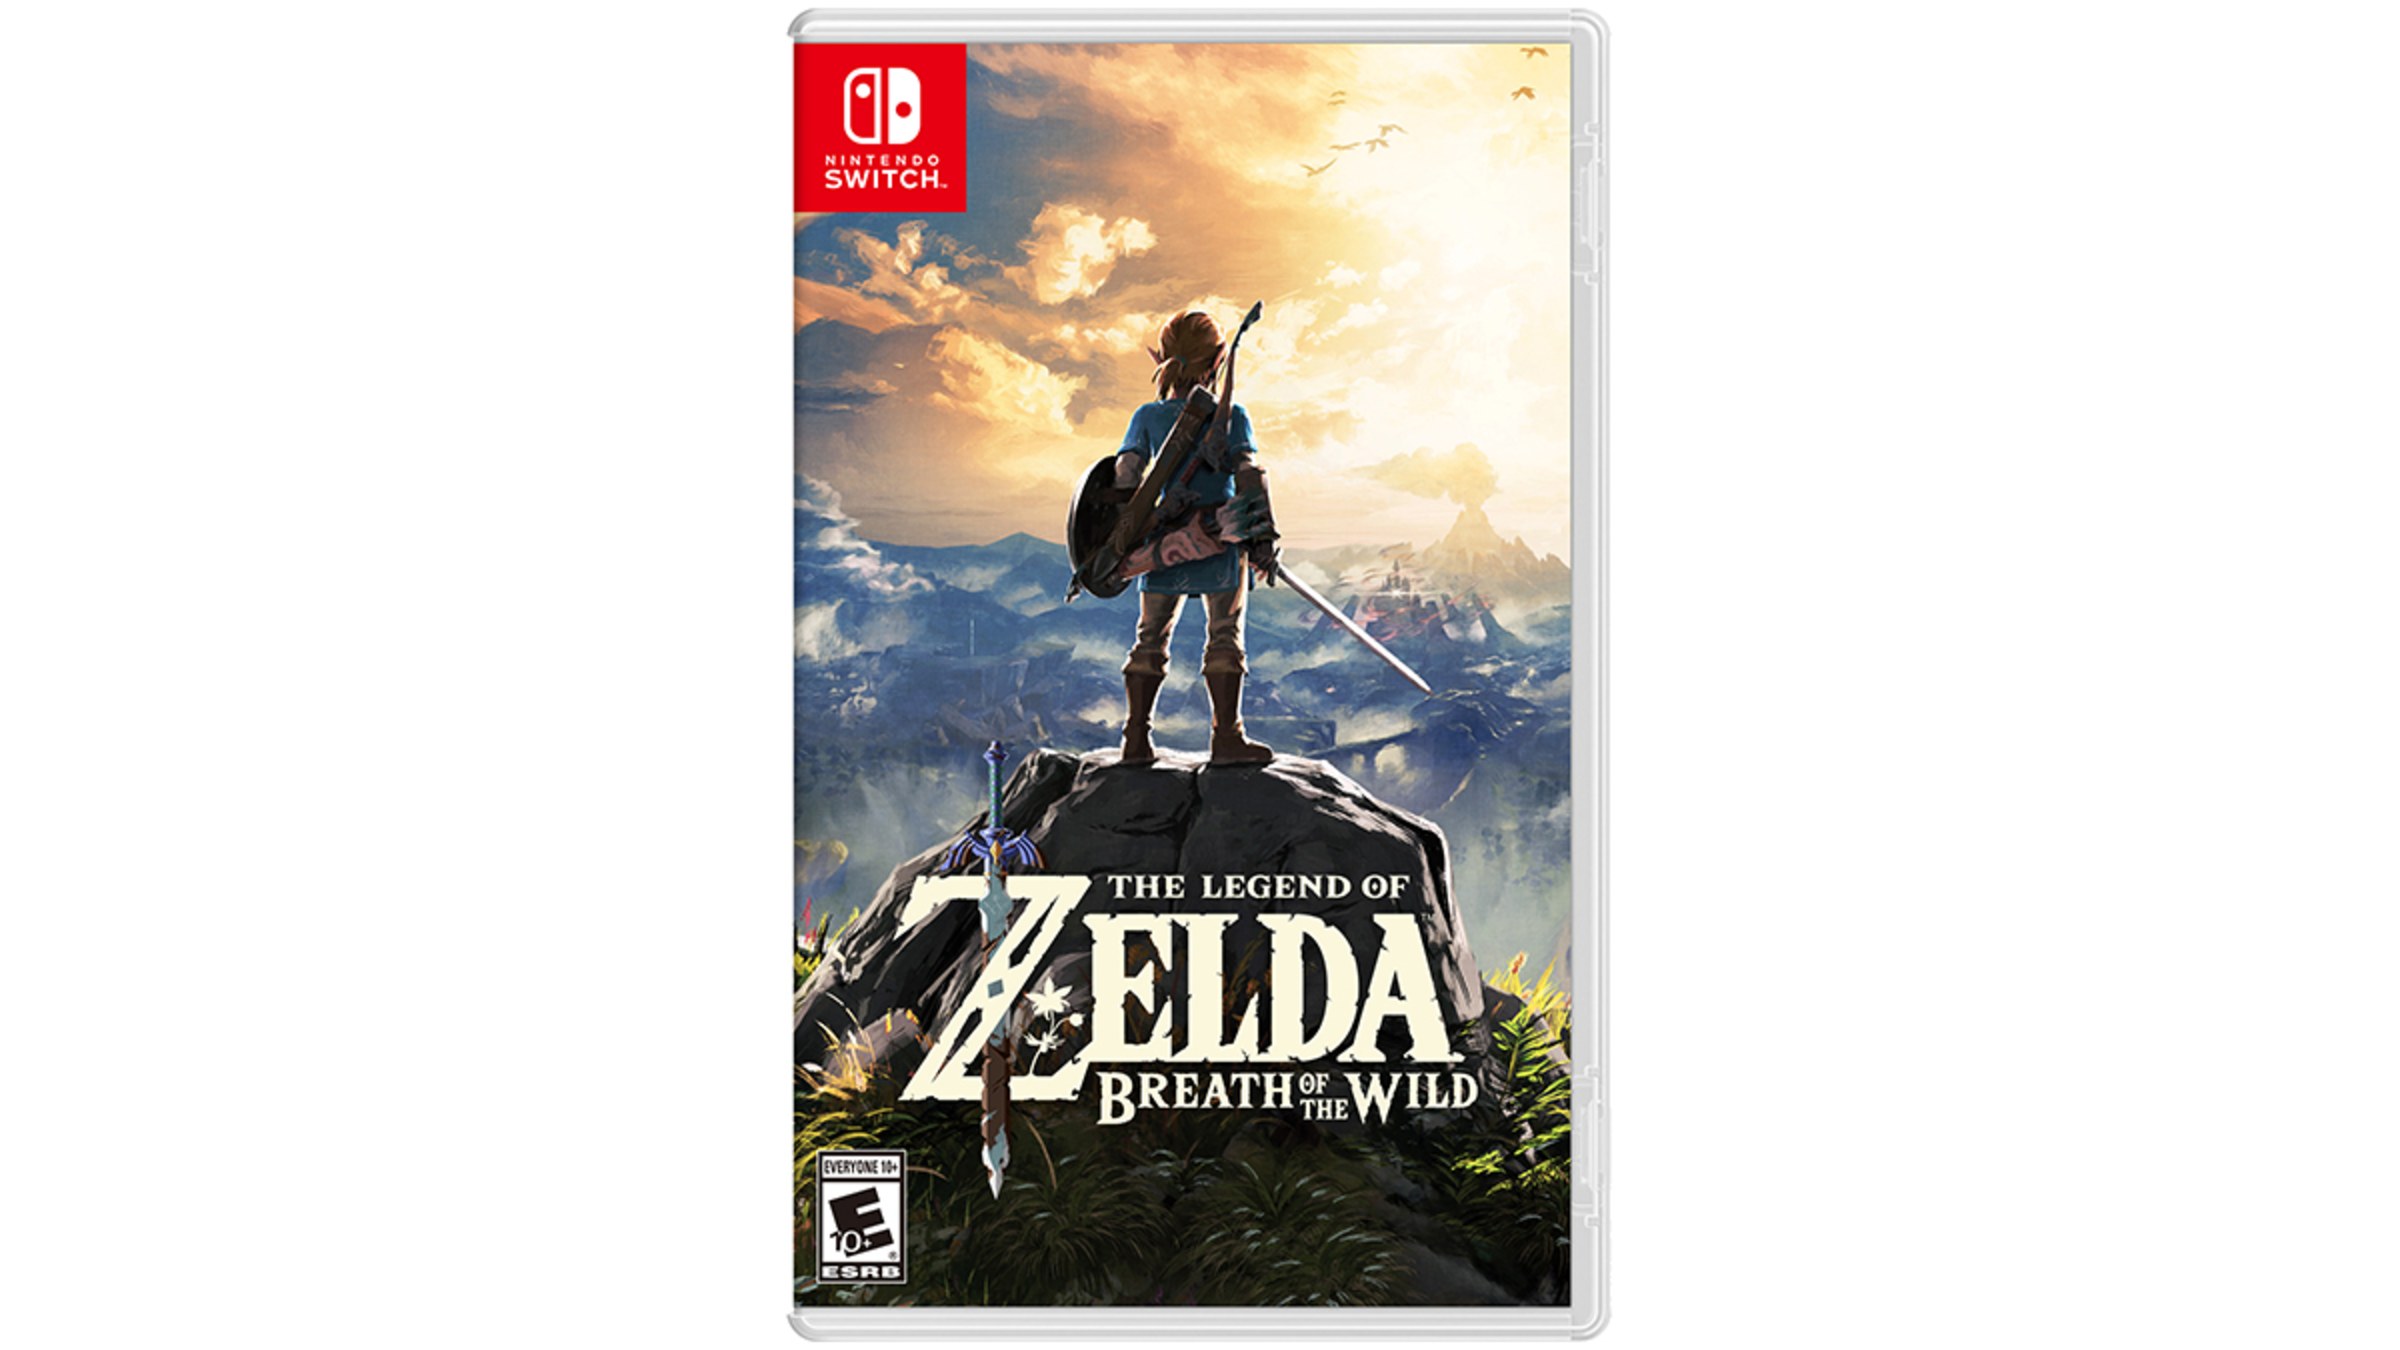 Nintendo of Breath Official The Legend - Site Zelda™: the Switch Nintendo of for Wild